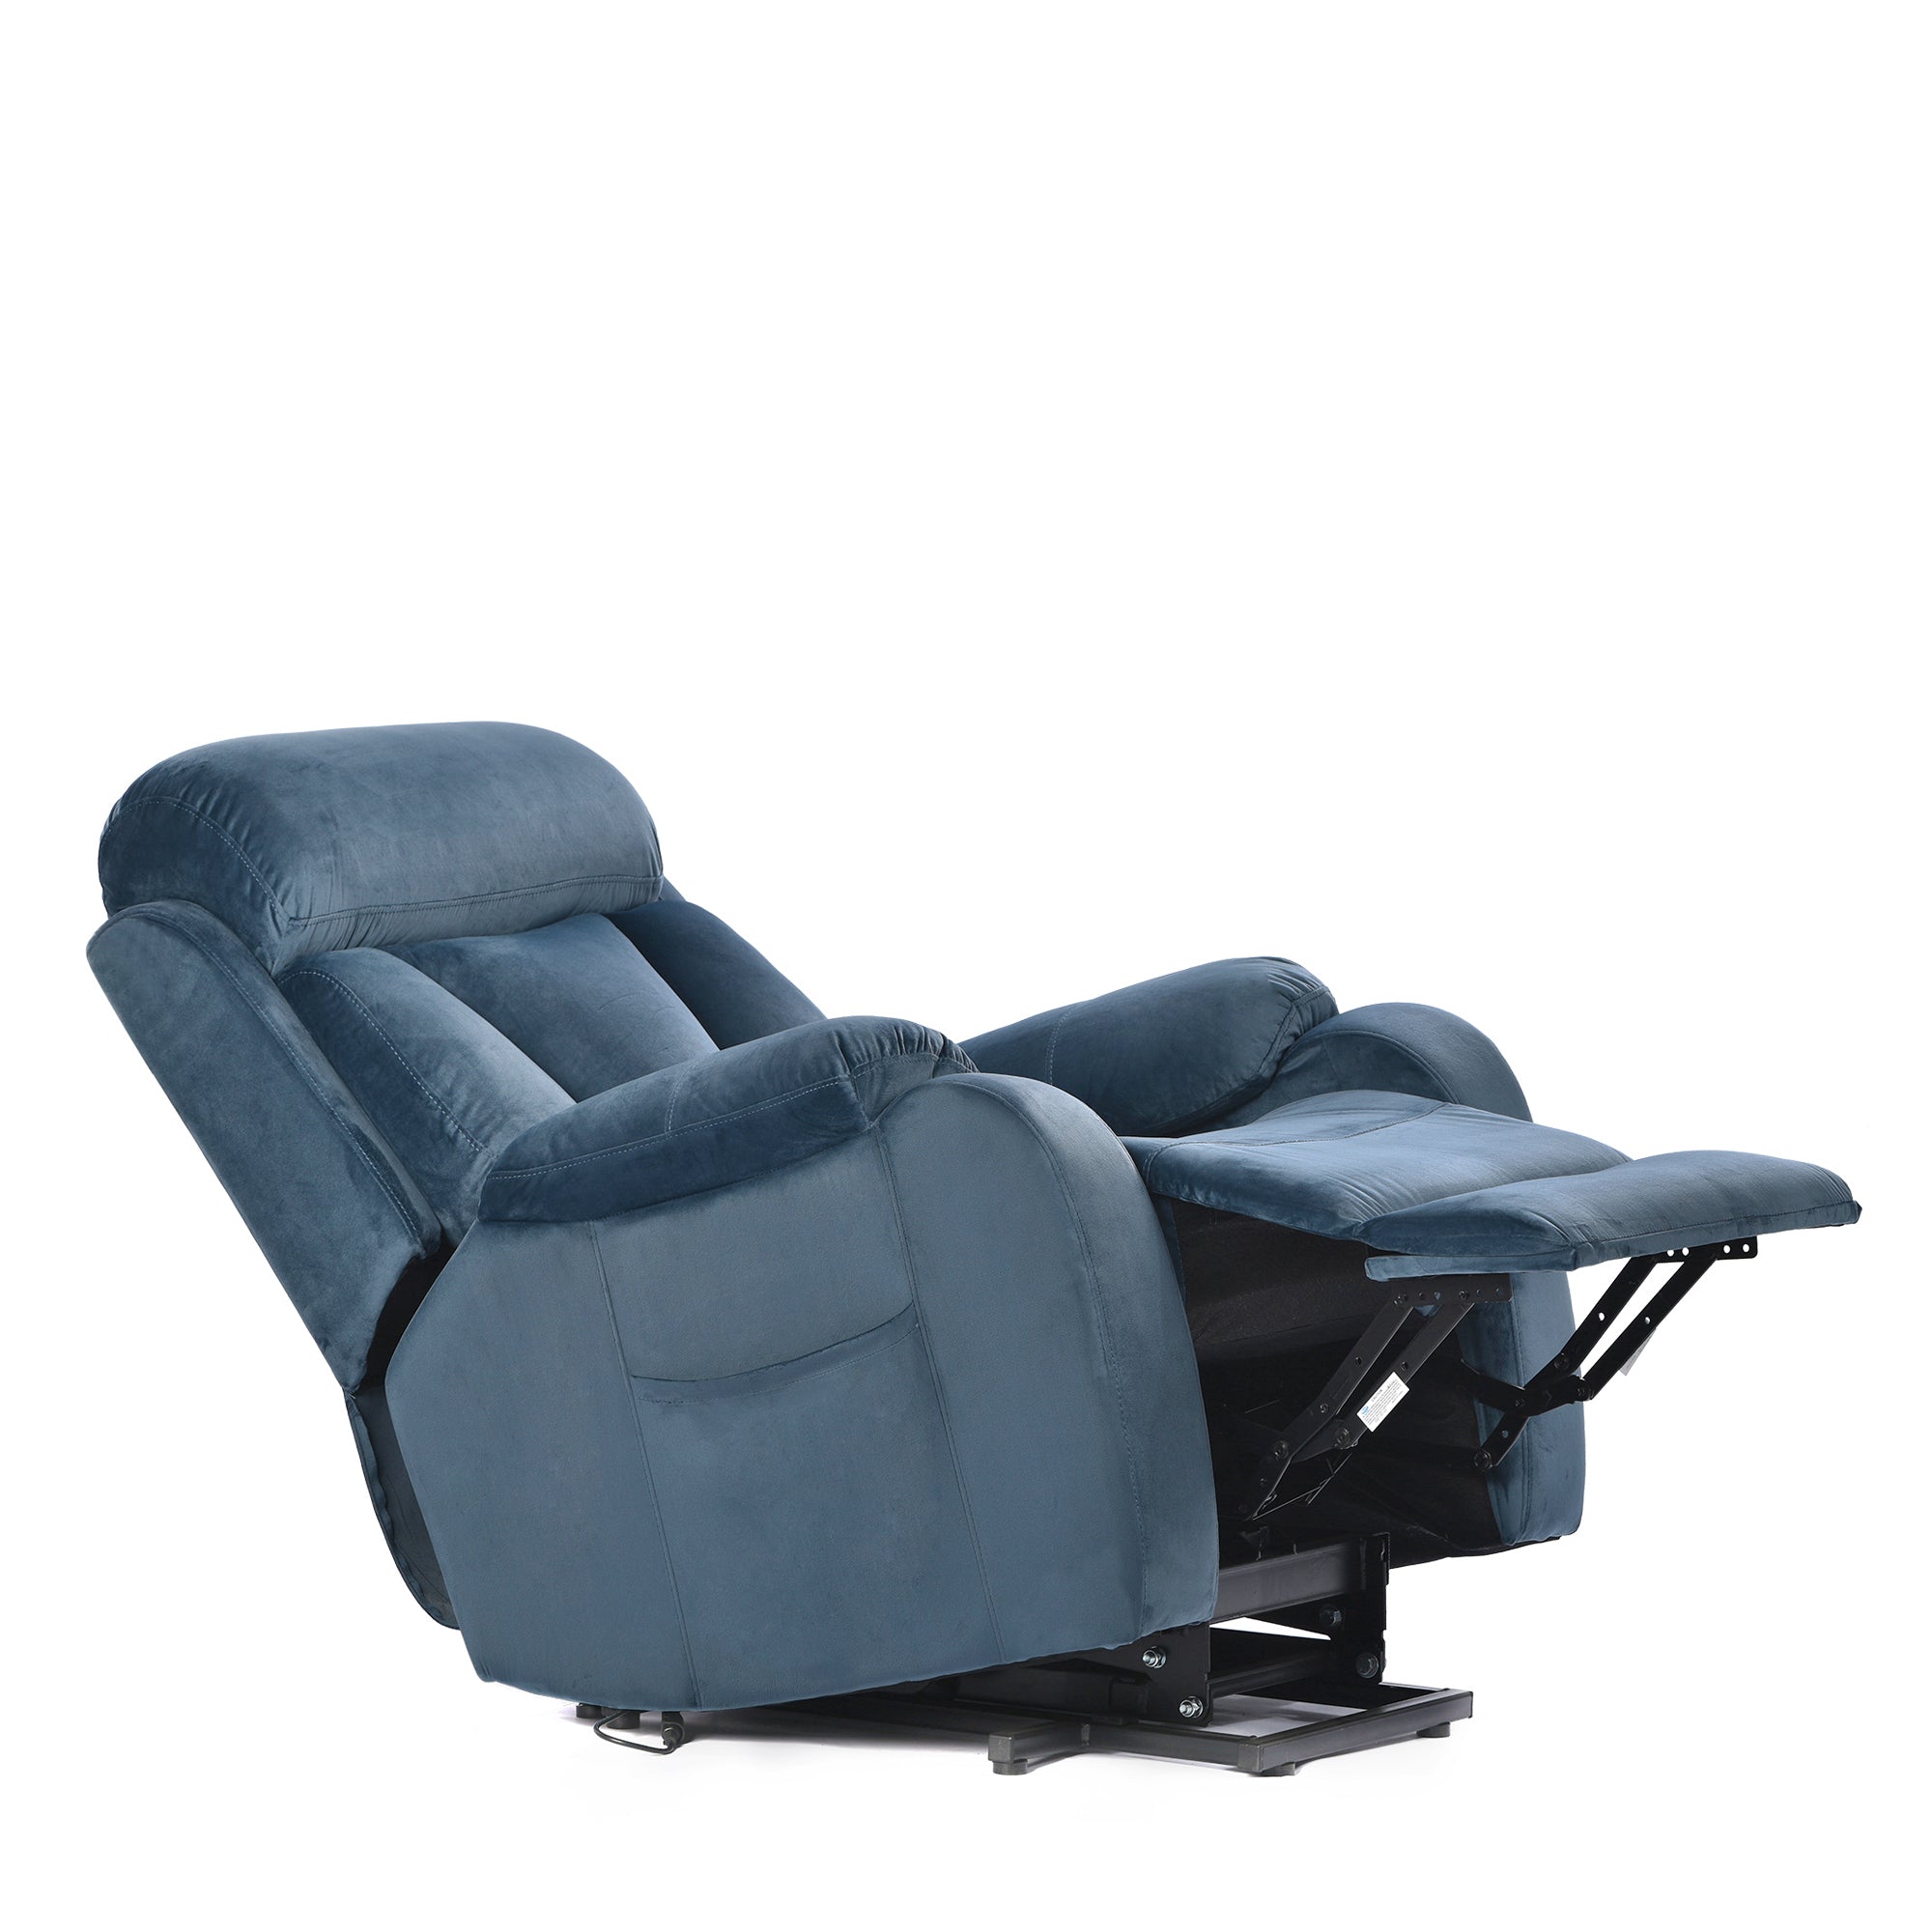 Lift Chair Recliner with Australia Cashmere Fabric, angle reclined